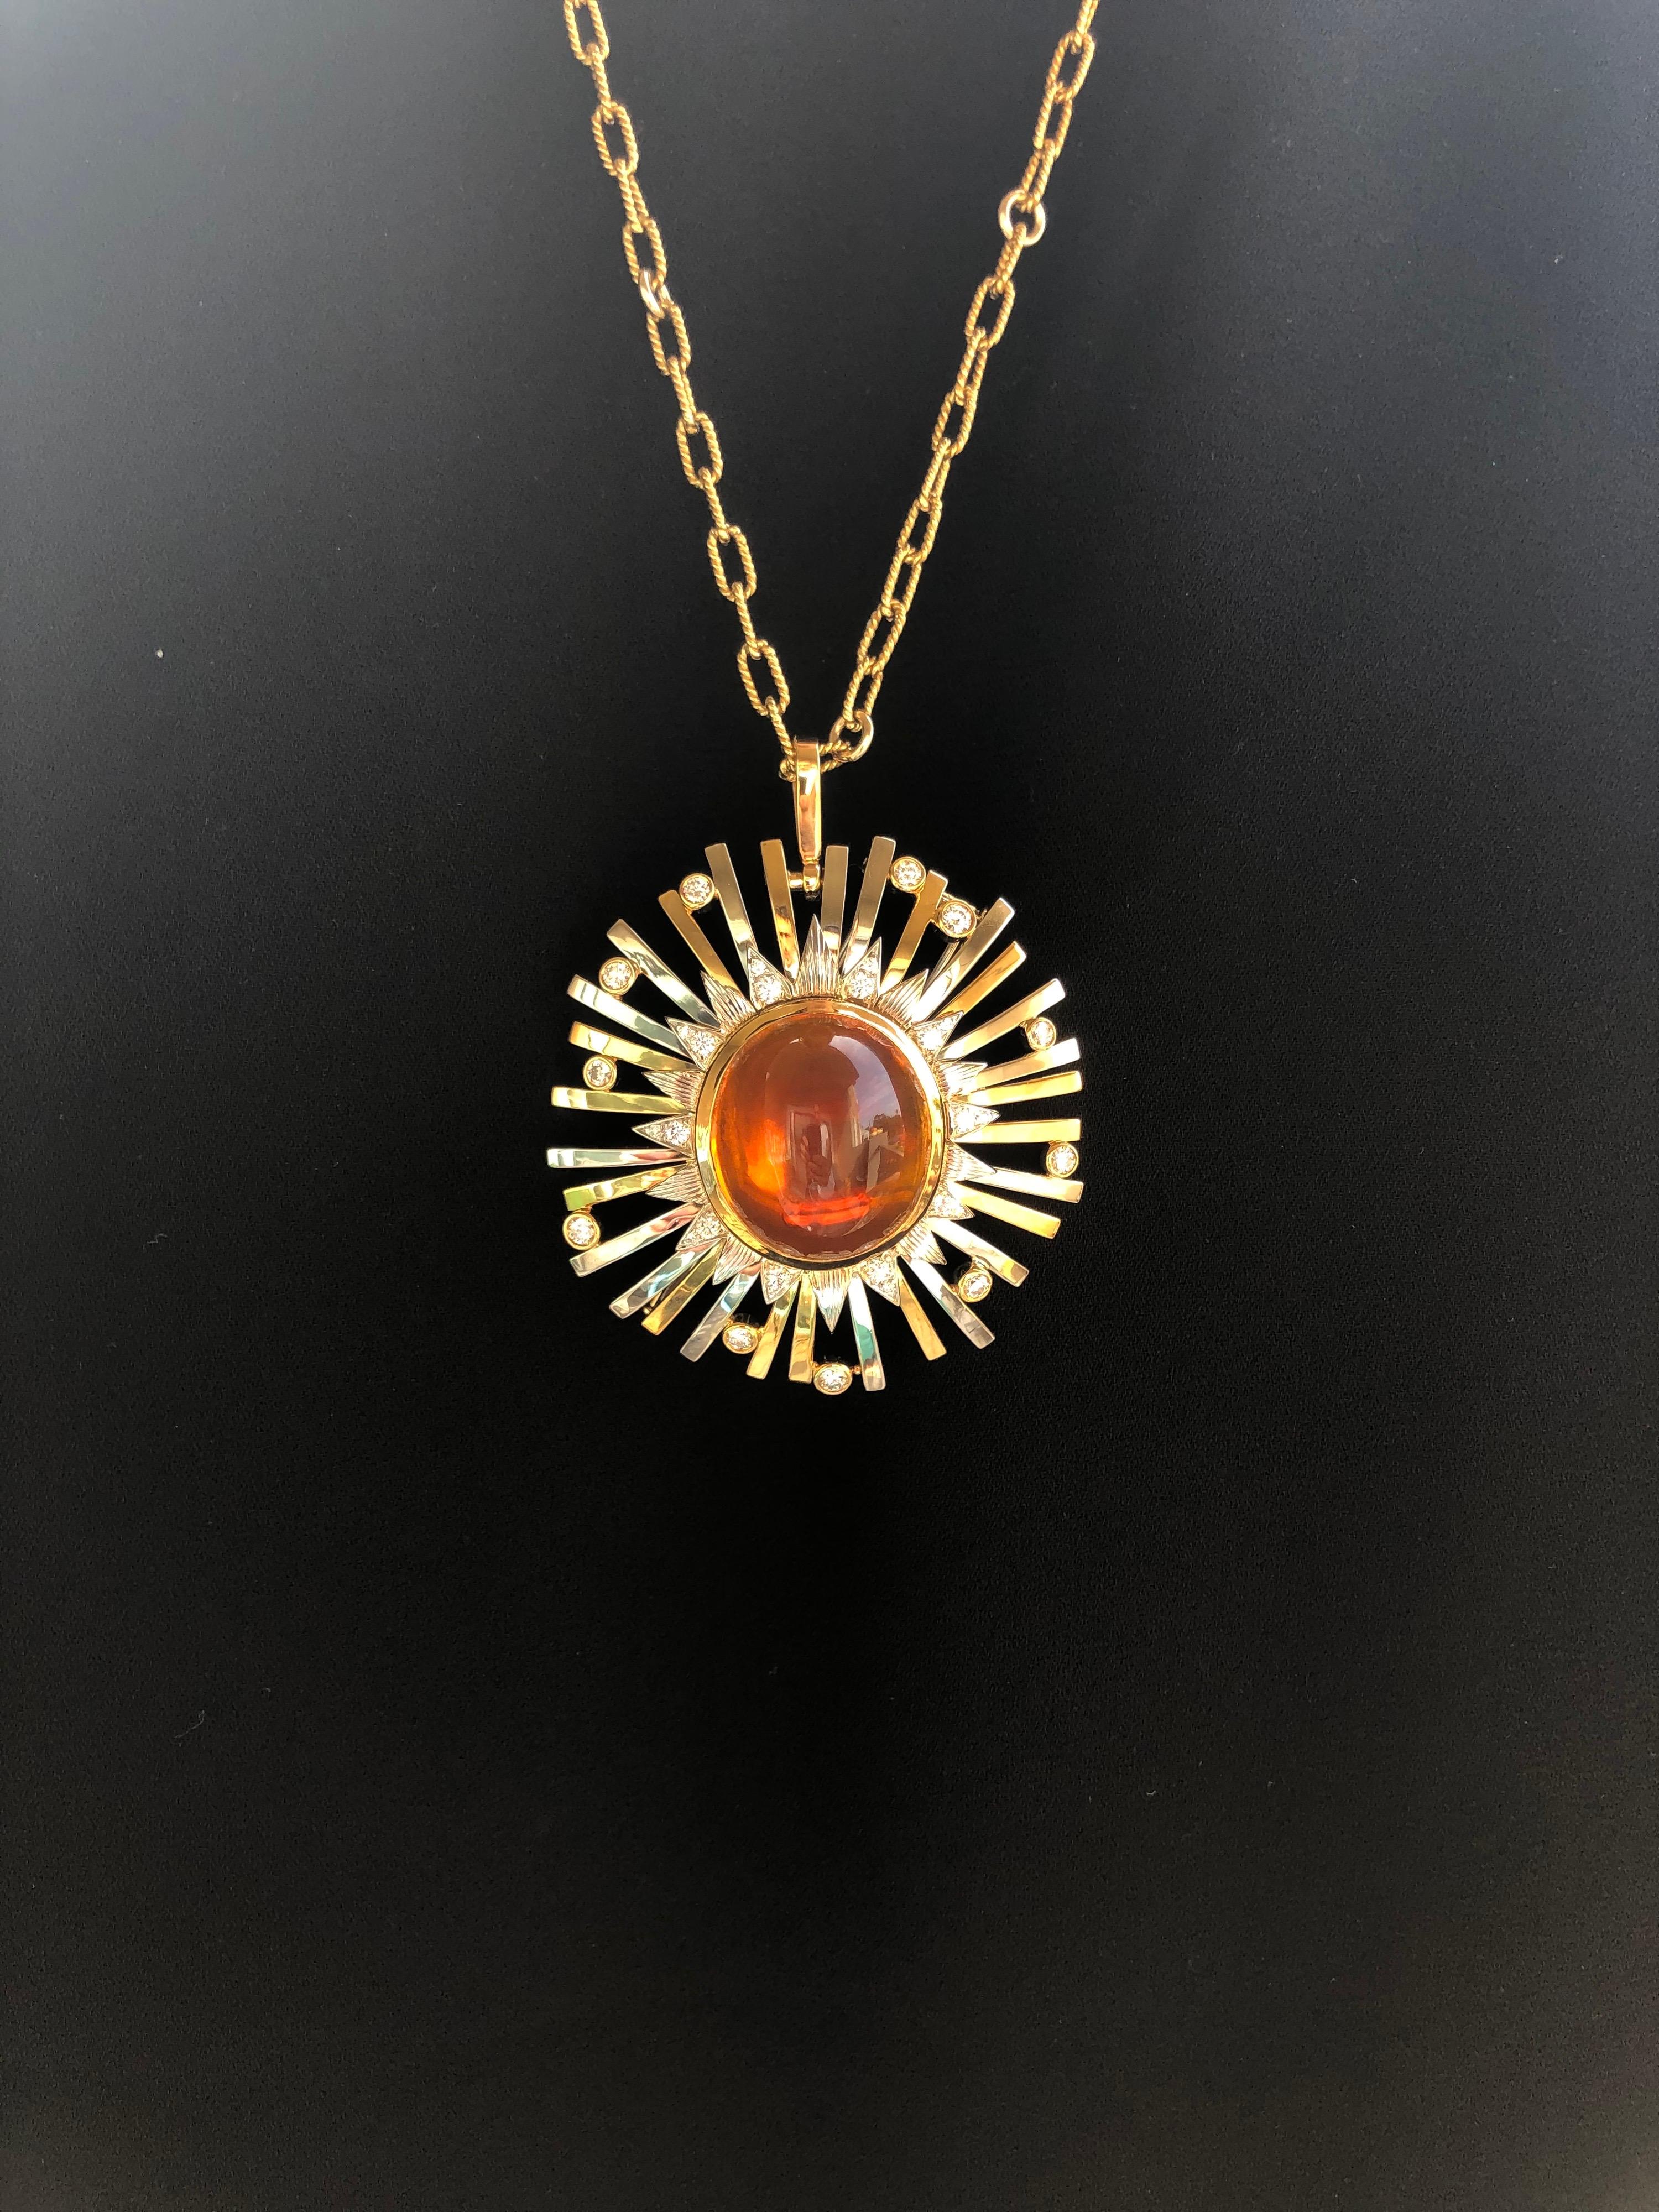 Madeira Citrine Cabochon 24.14 Carat Pendant Necklace Brooch For Sale 1